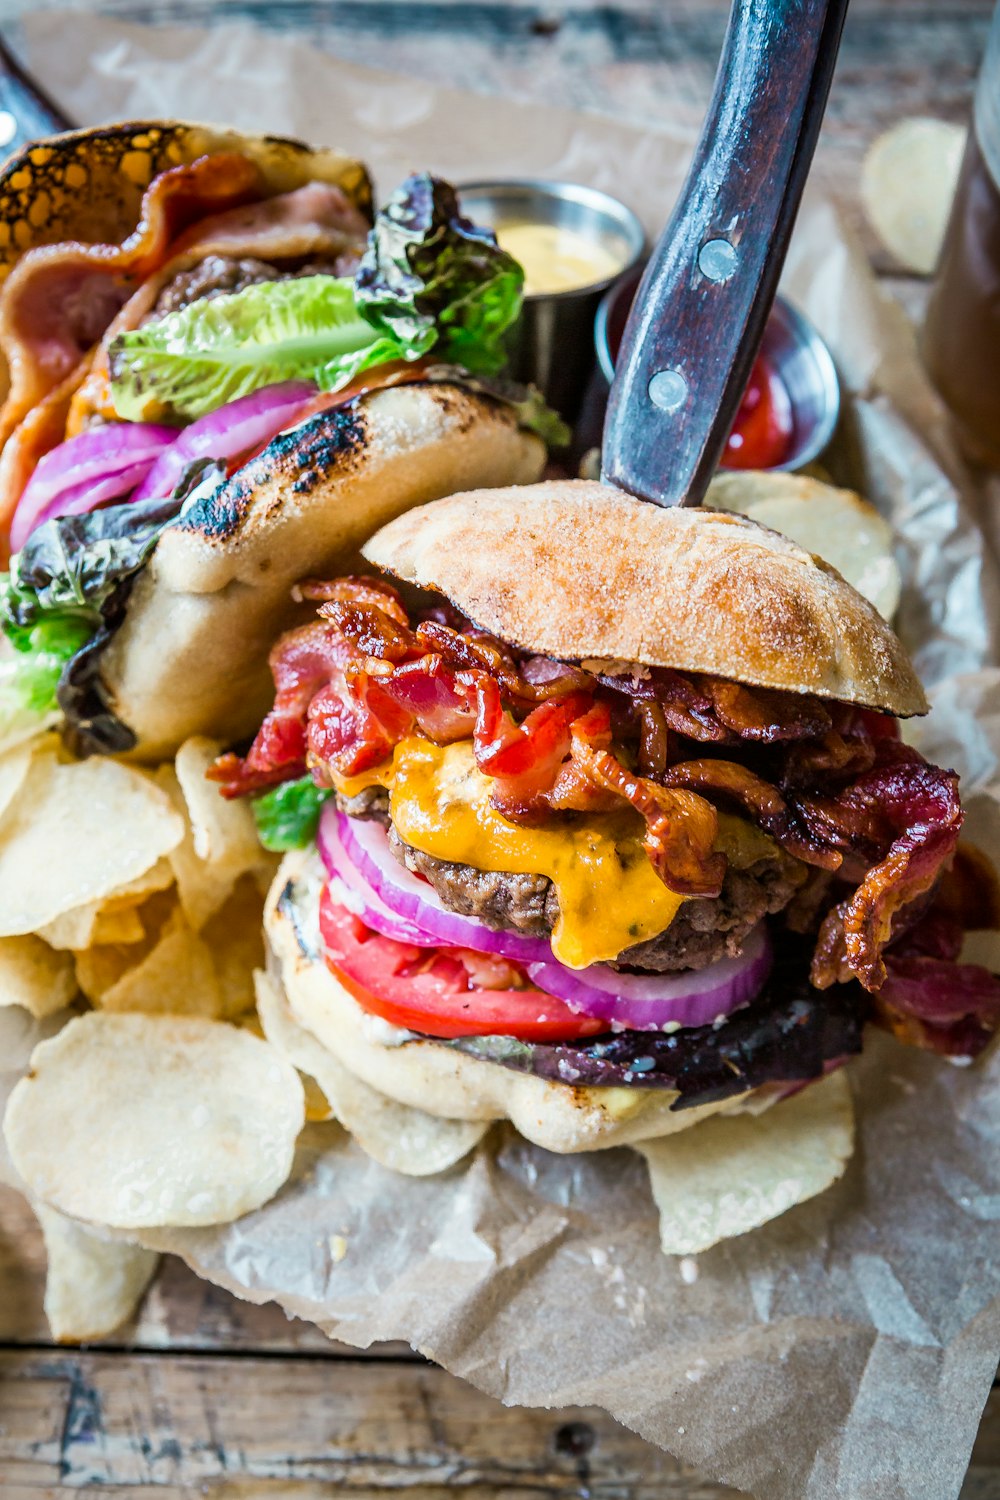 a sandwich with bacon, lettuce, tomato, and other toppings